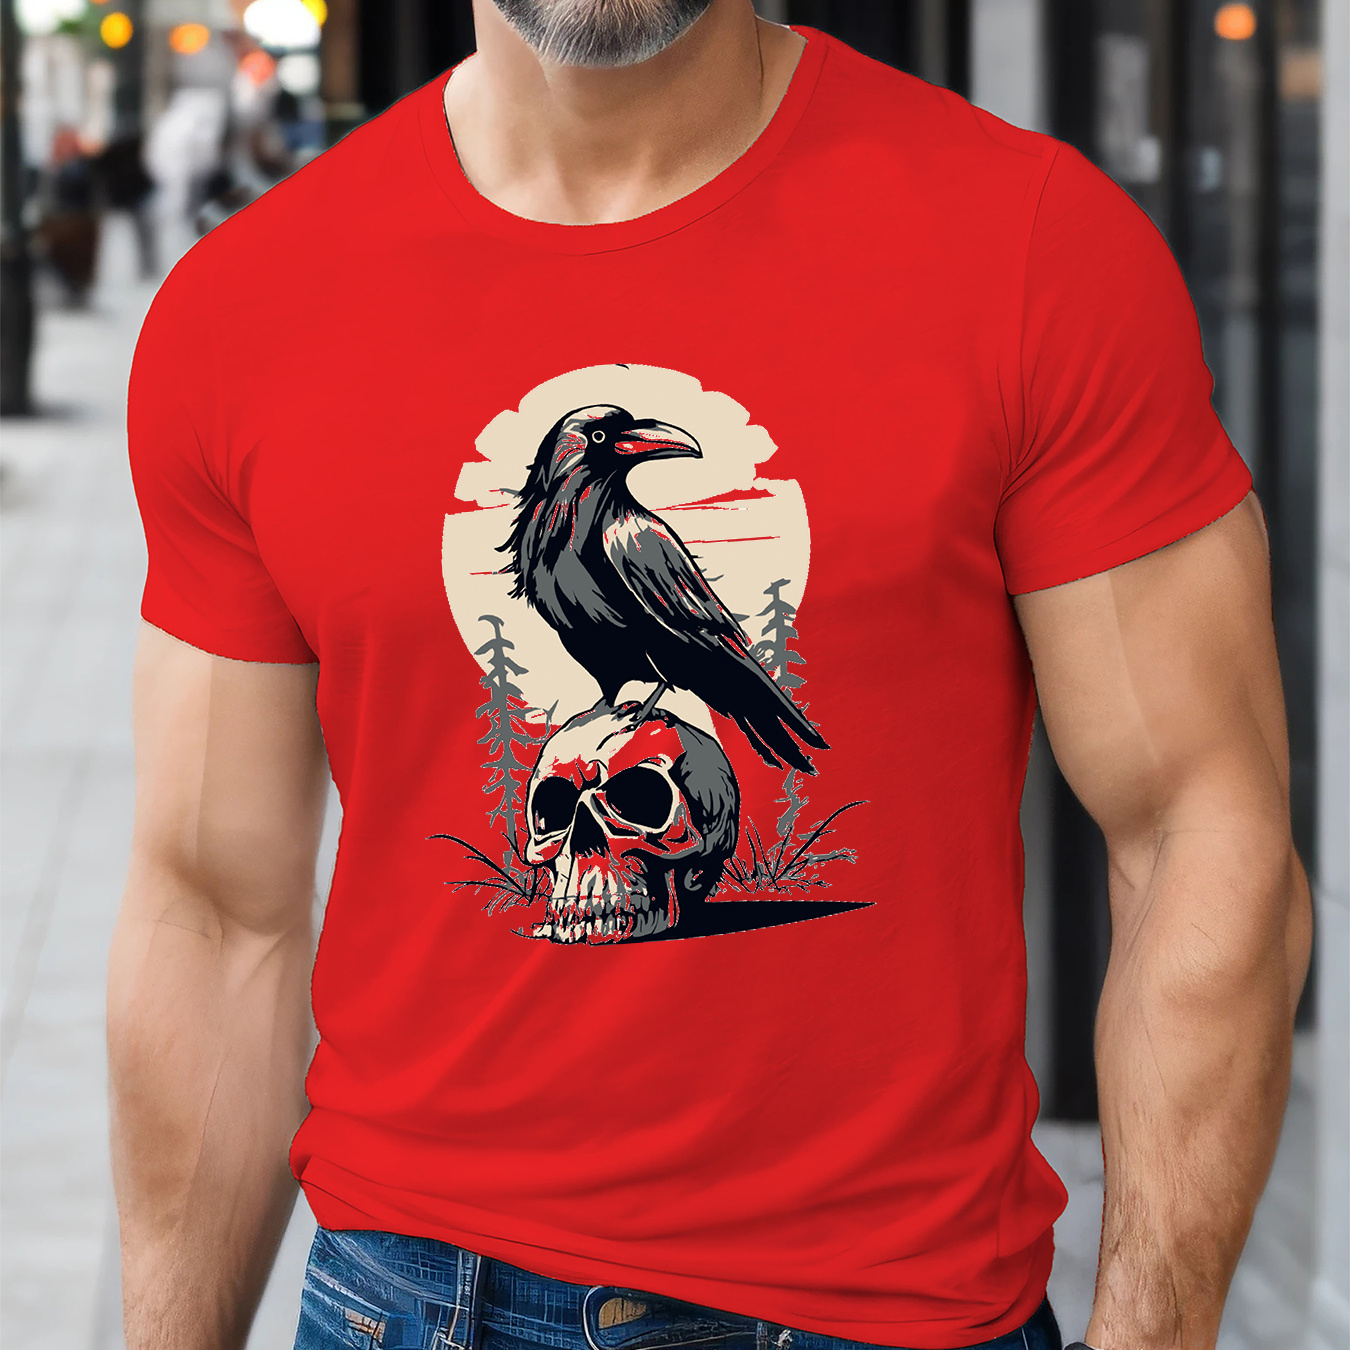 

Skull And Crow Pattern Print Men's Creative Top, Casual Short Sleeve Crew Neck T-shirt, Men's Clothing For Summer Outdoor